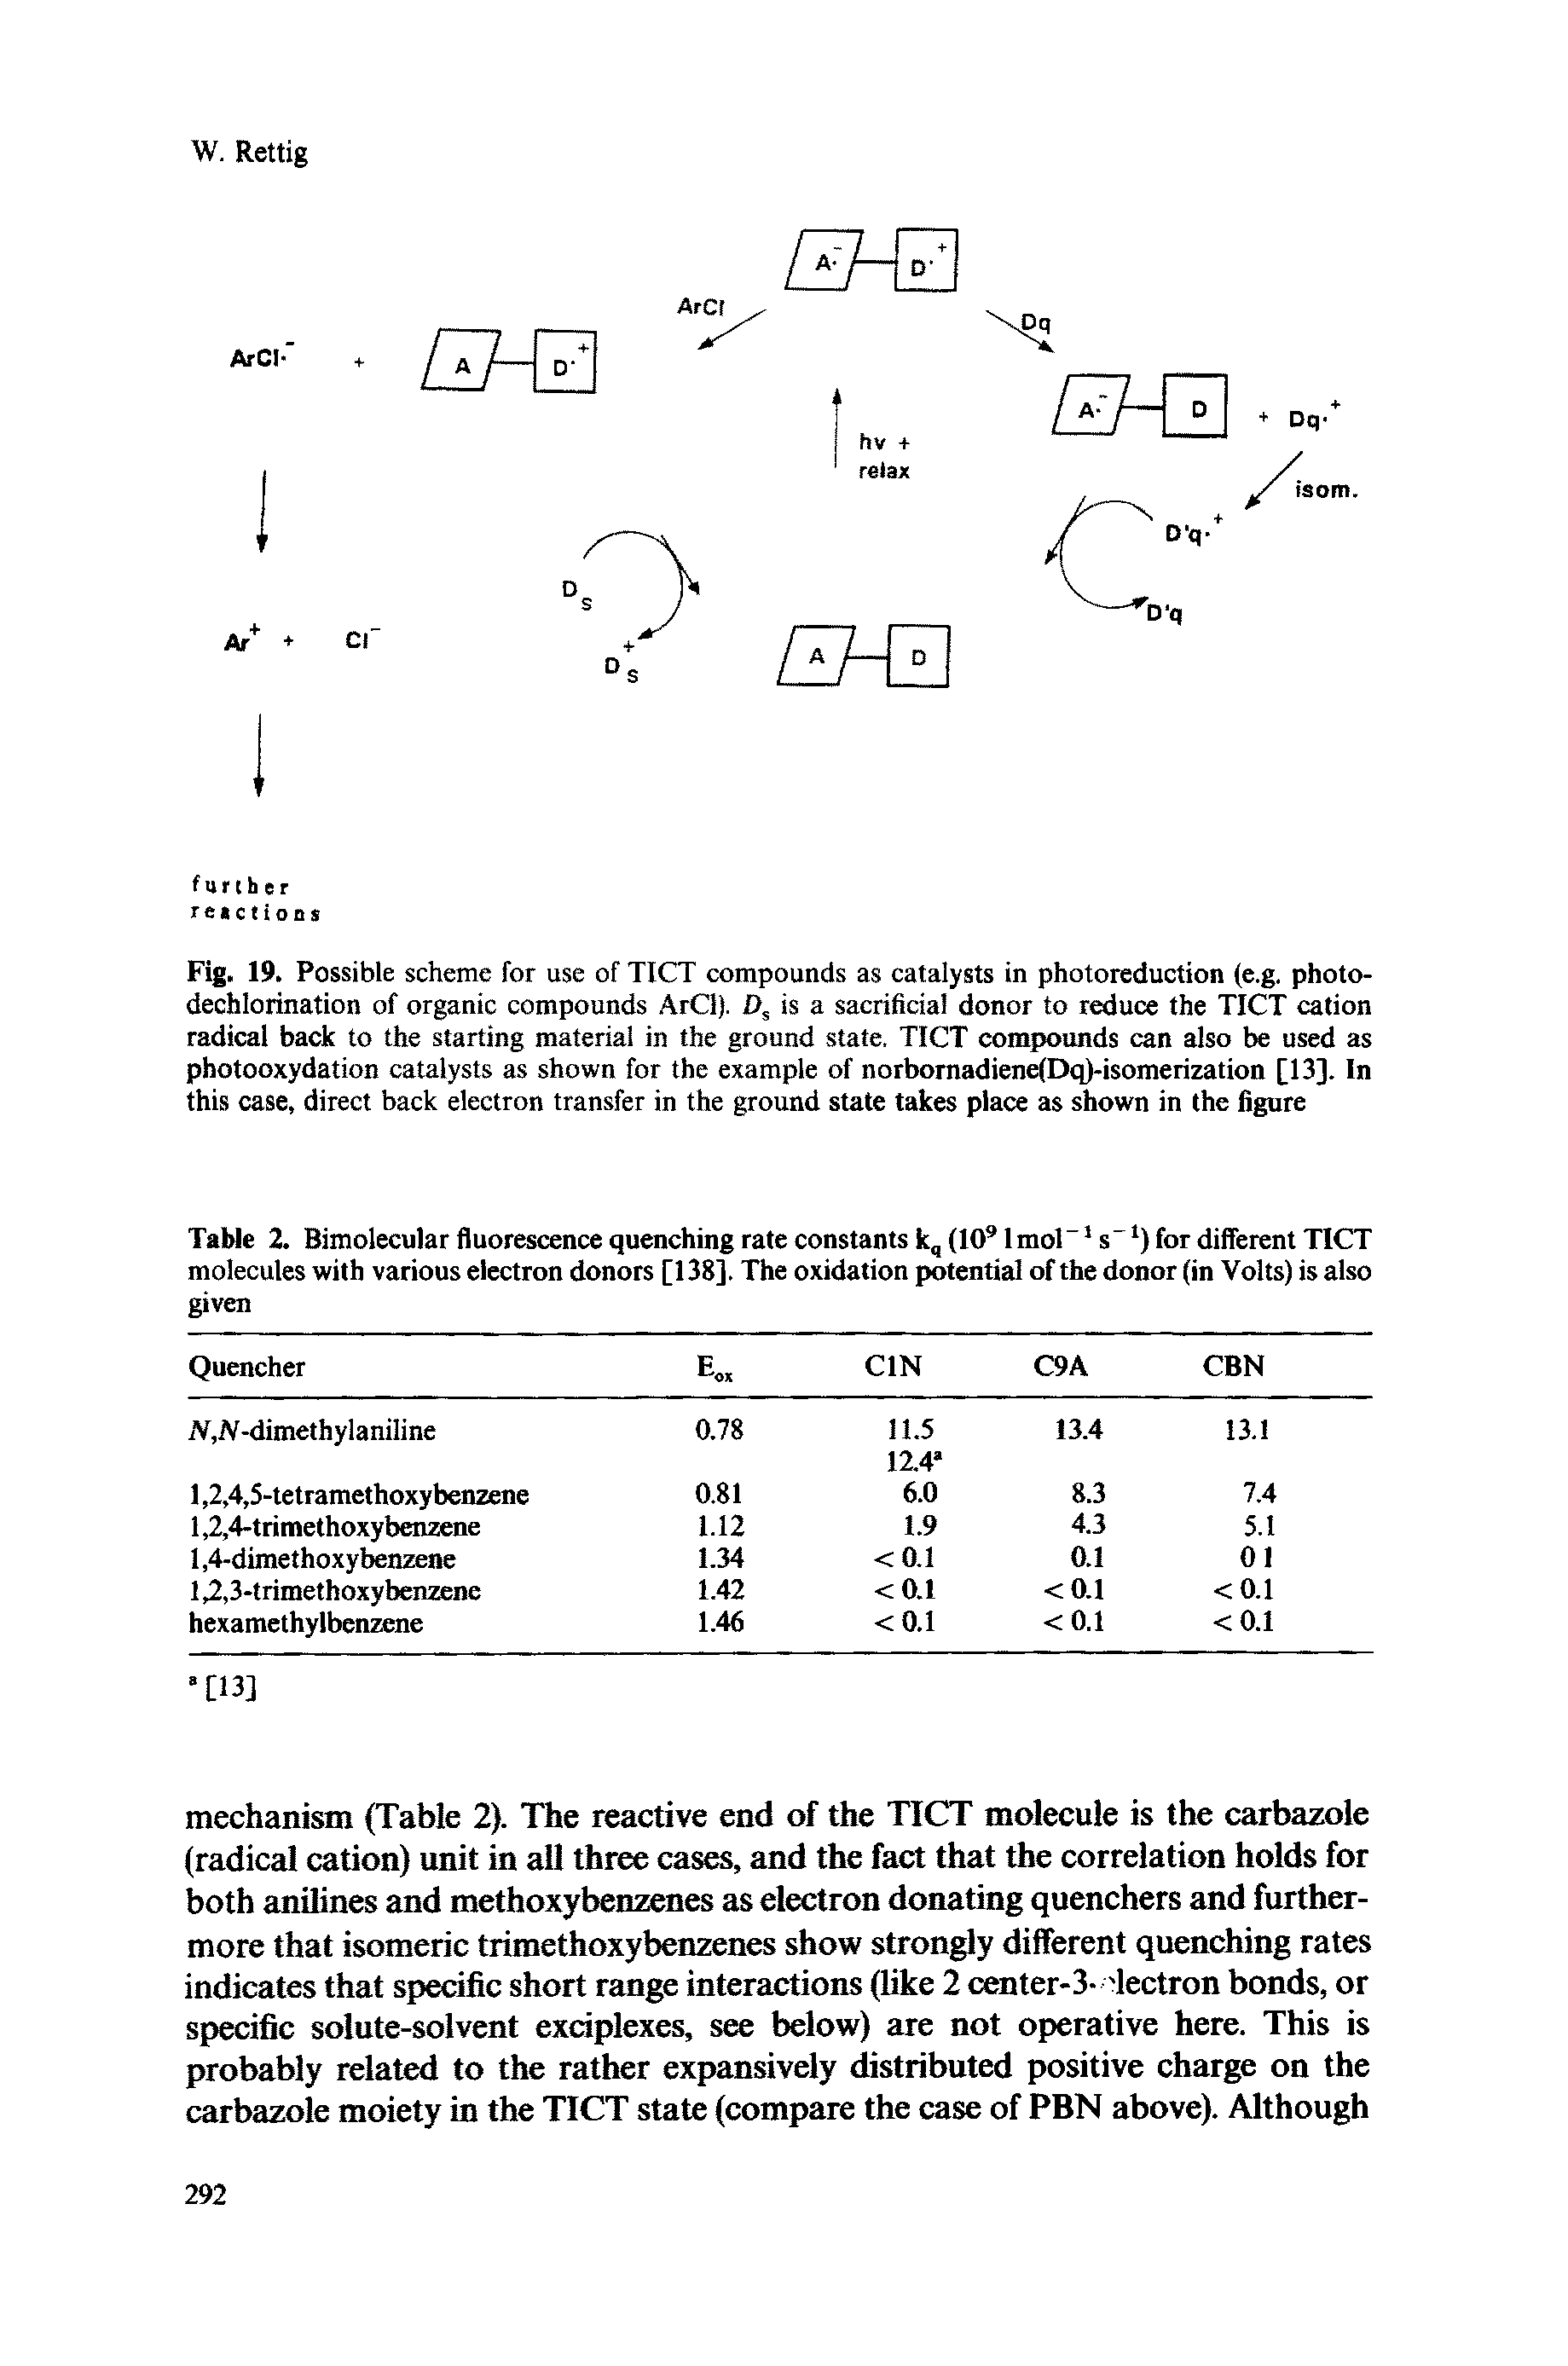 Fig. 19. Possible scheme for use of TICT compounds as catalysts in photoreduction (e.g. photodechlorination of organic compounds ArCl). >, is a sacrificial donor to reduce the TICT cation radical back to the starting material in the ground state, TICT compounds can also be used as photooxydation catalysts as shown for the example of norbornadiene(Dq)-isomerization [13]. In this case, direct back electron transfer in the ground state takes place as shown in the figure...